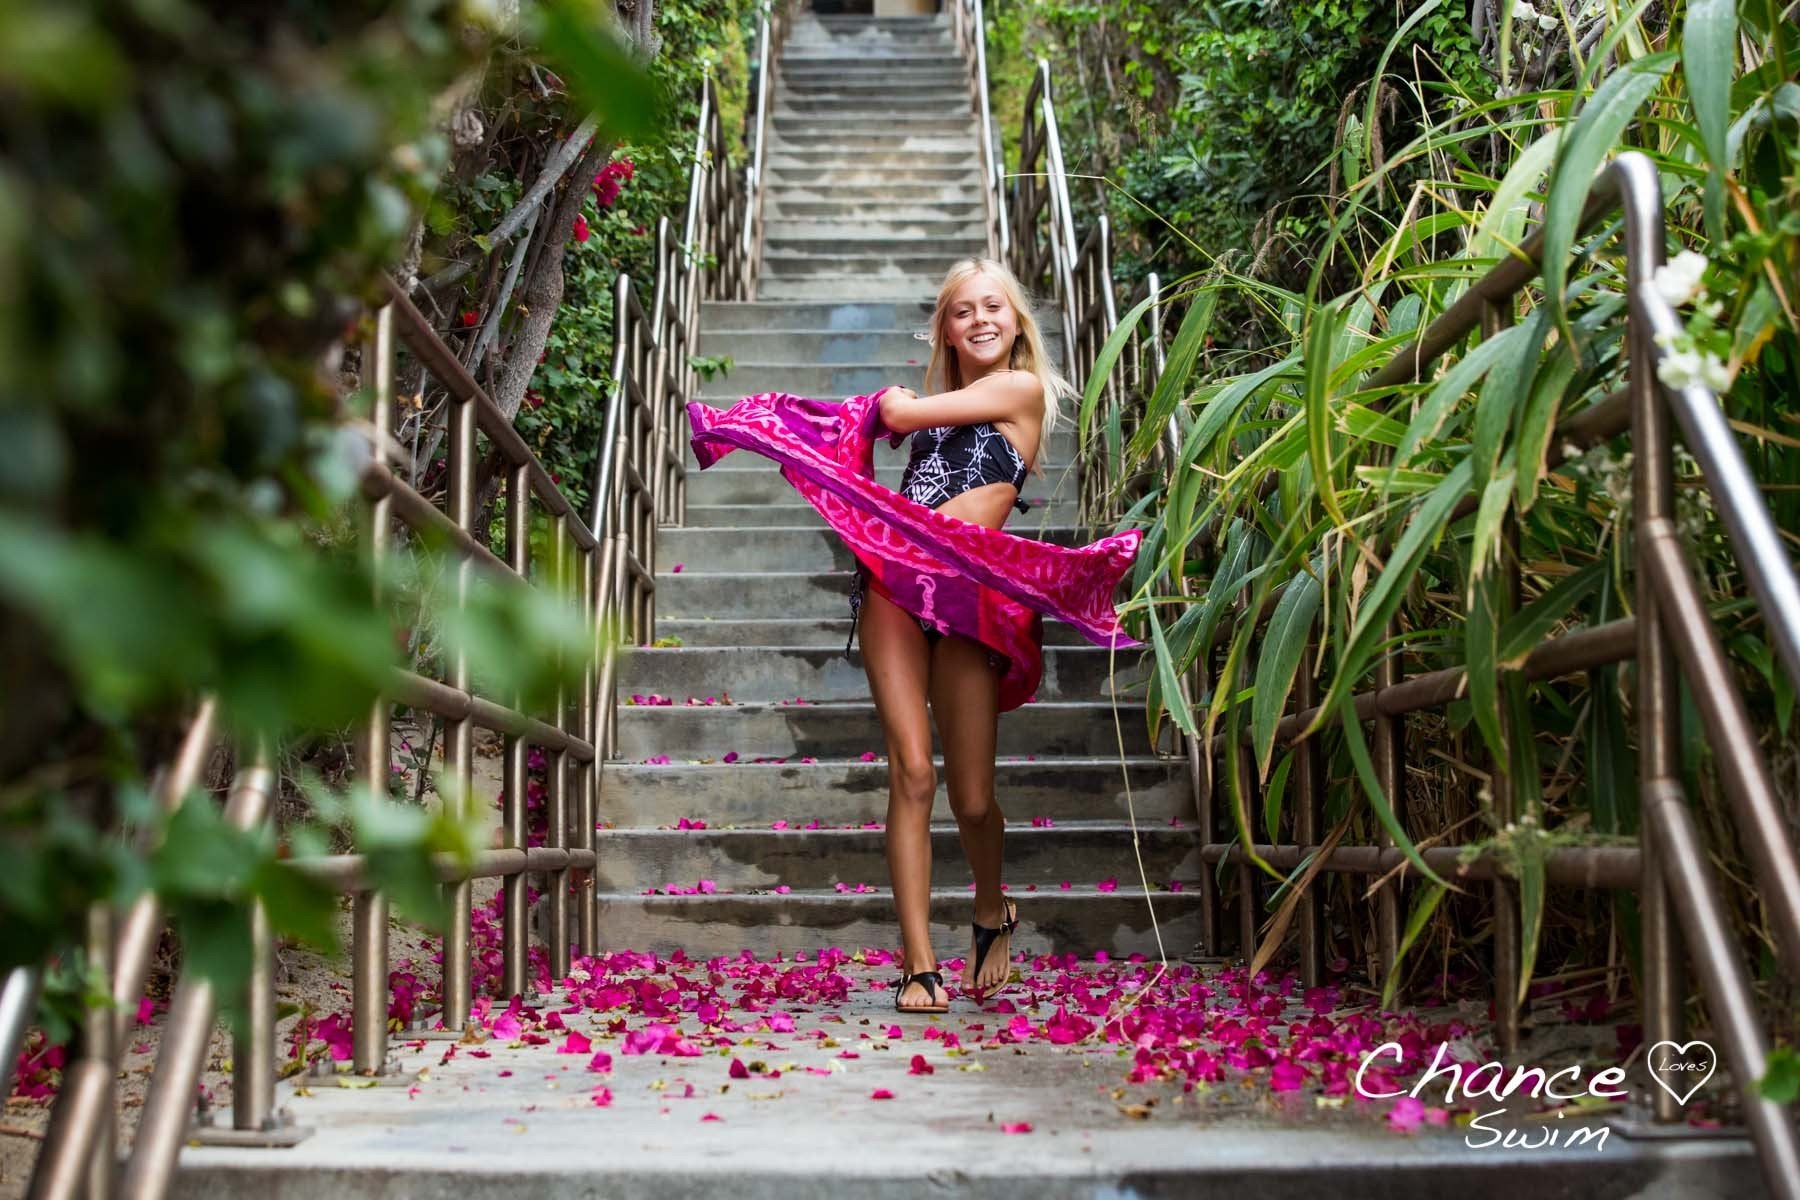 Coming down the stairs and dancing in the rain is 11 year old Chance Colette, designer and founder of Chance Loves Swimwear